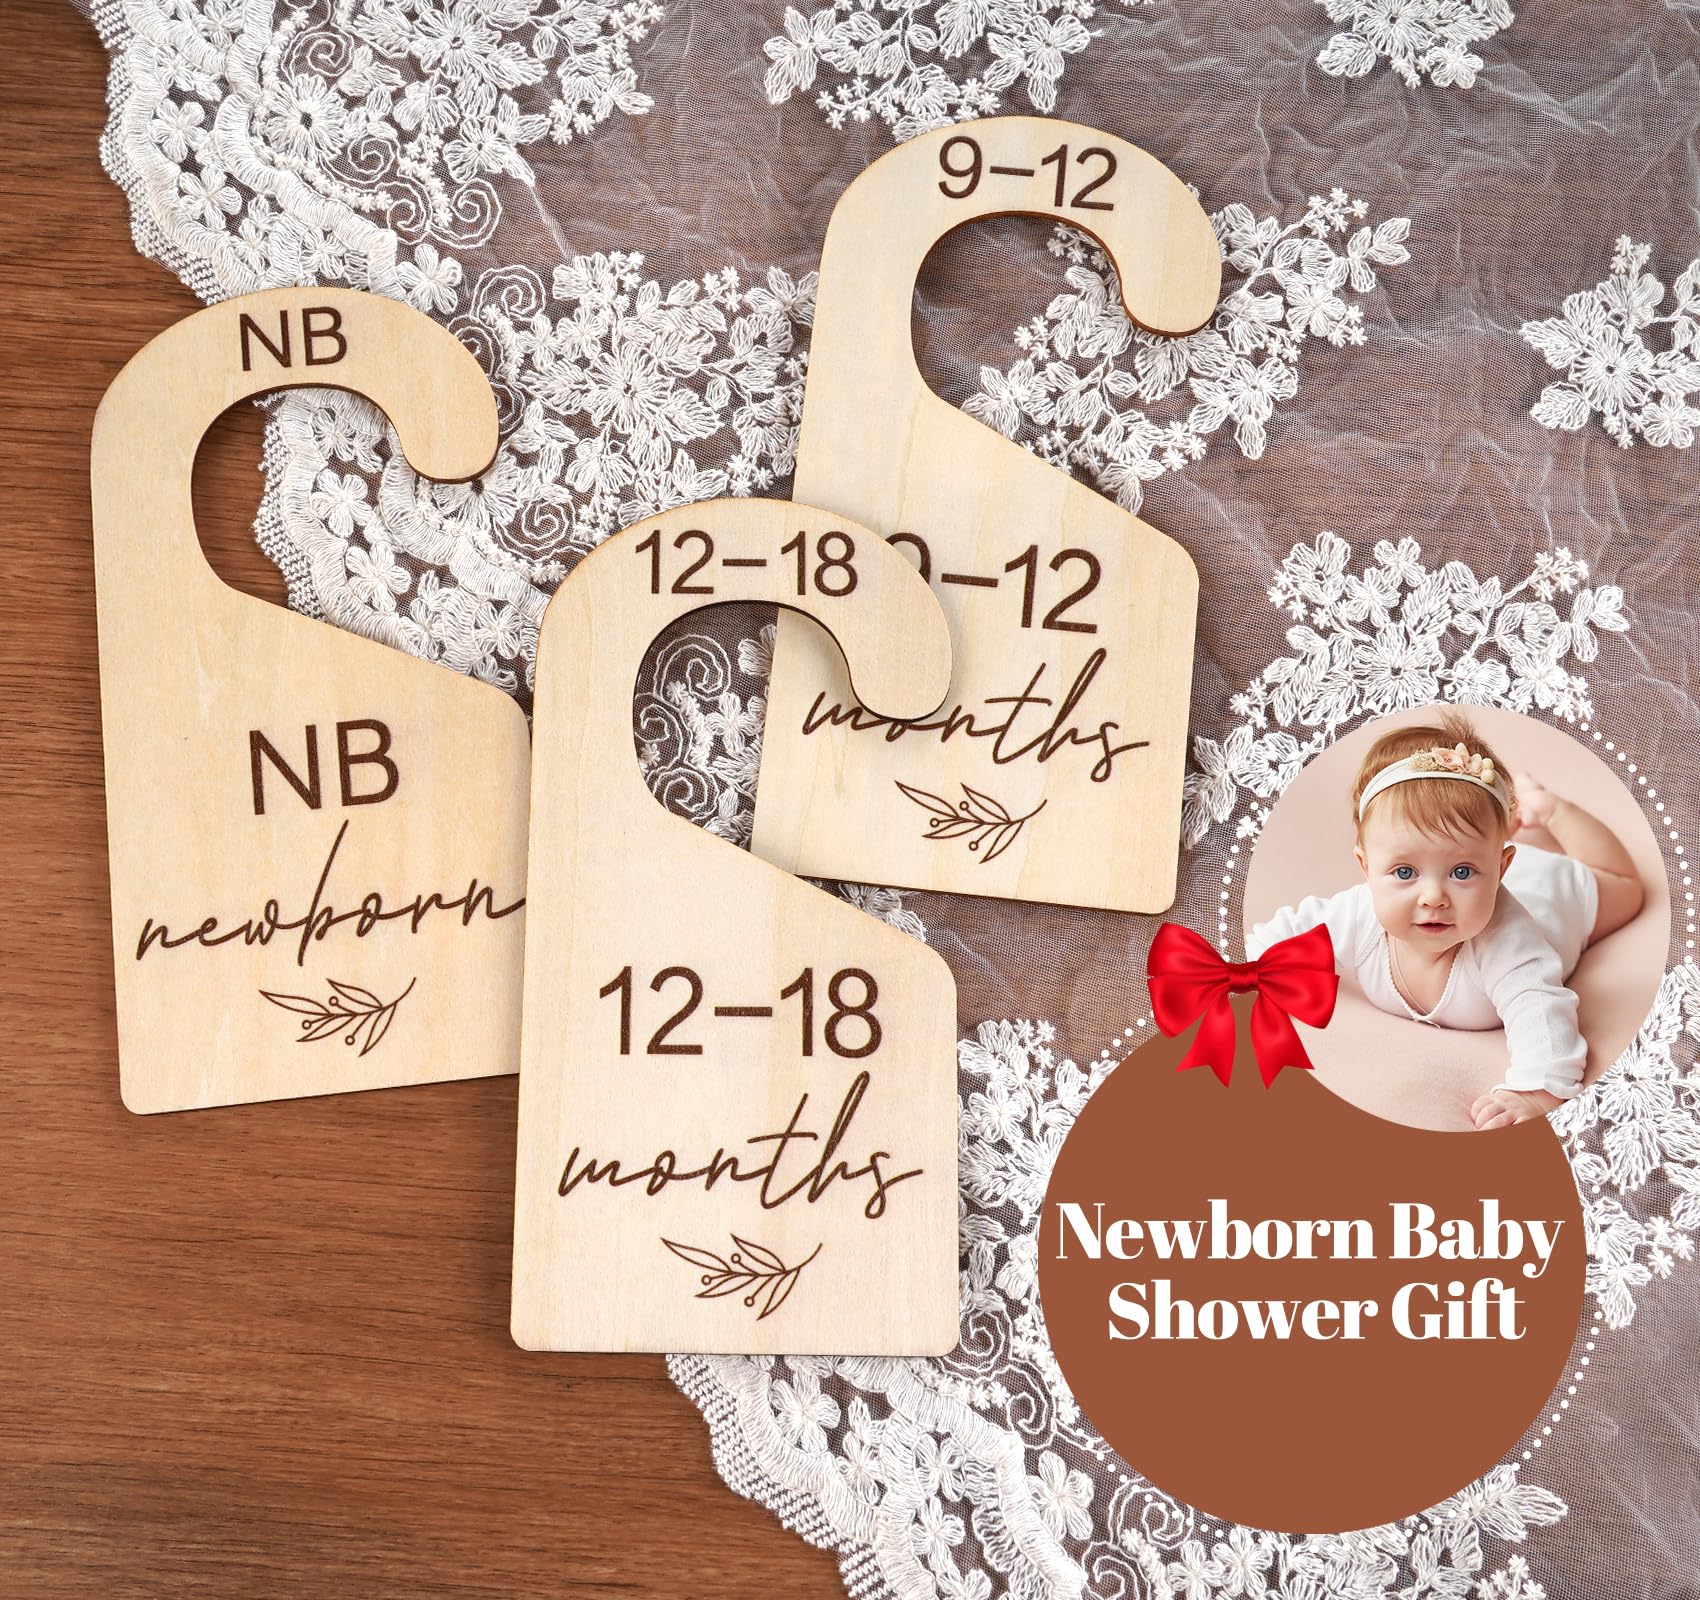 Beautiful Baby Closet Dividers for Clothes Organizer - Wooden Double-Sided Gender Neutral Size Dividers from Newborn to 24M for Nursery Decor & Organization Baby Party Gift Set